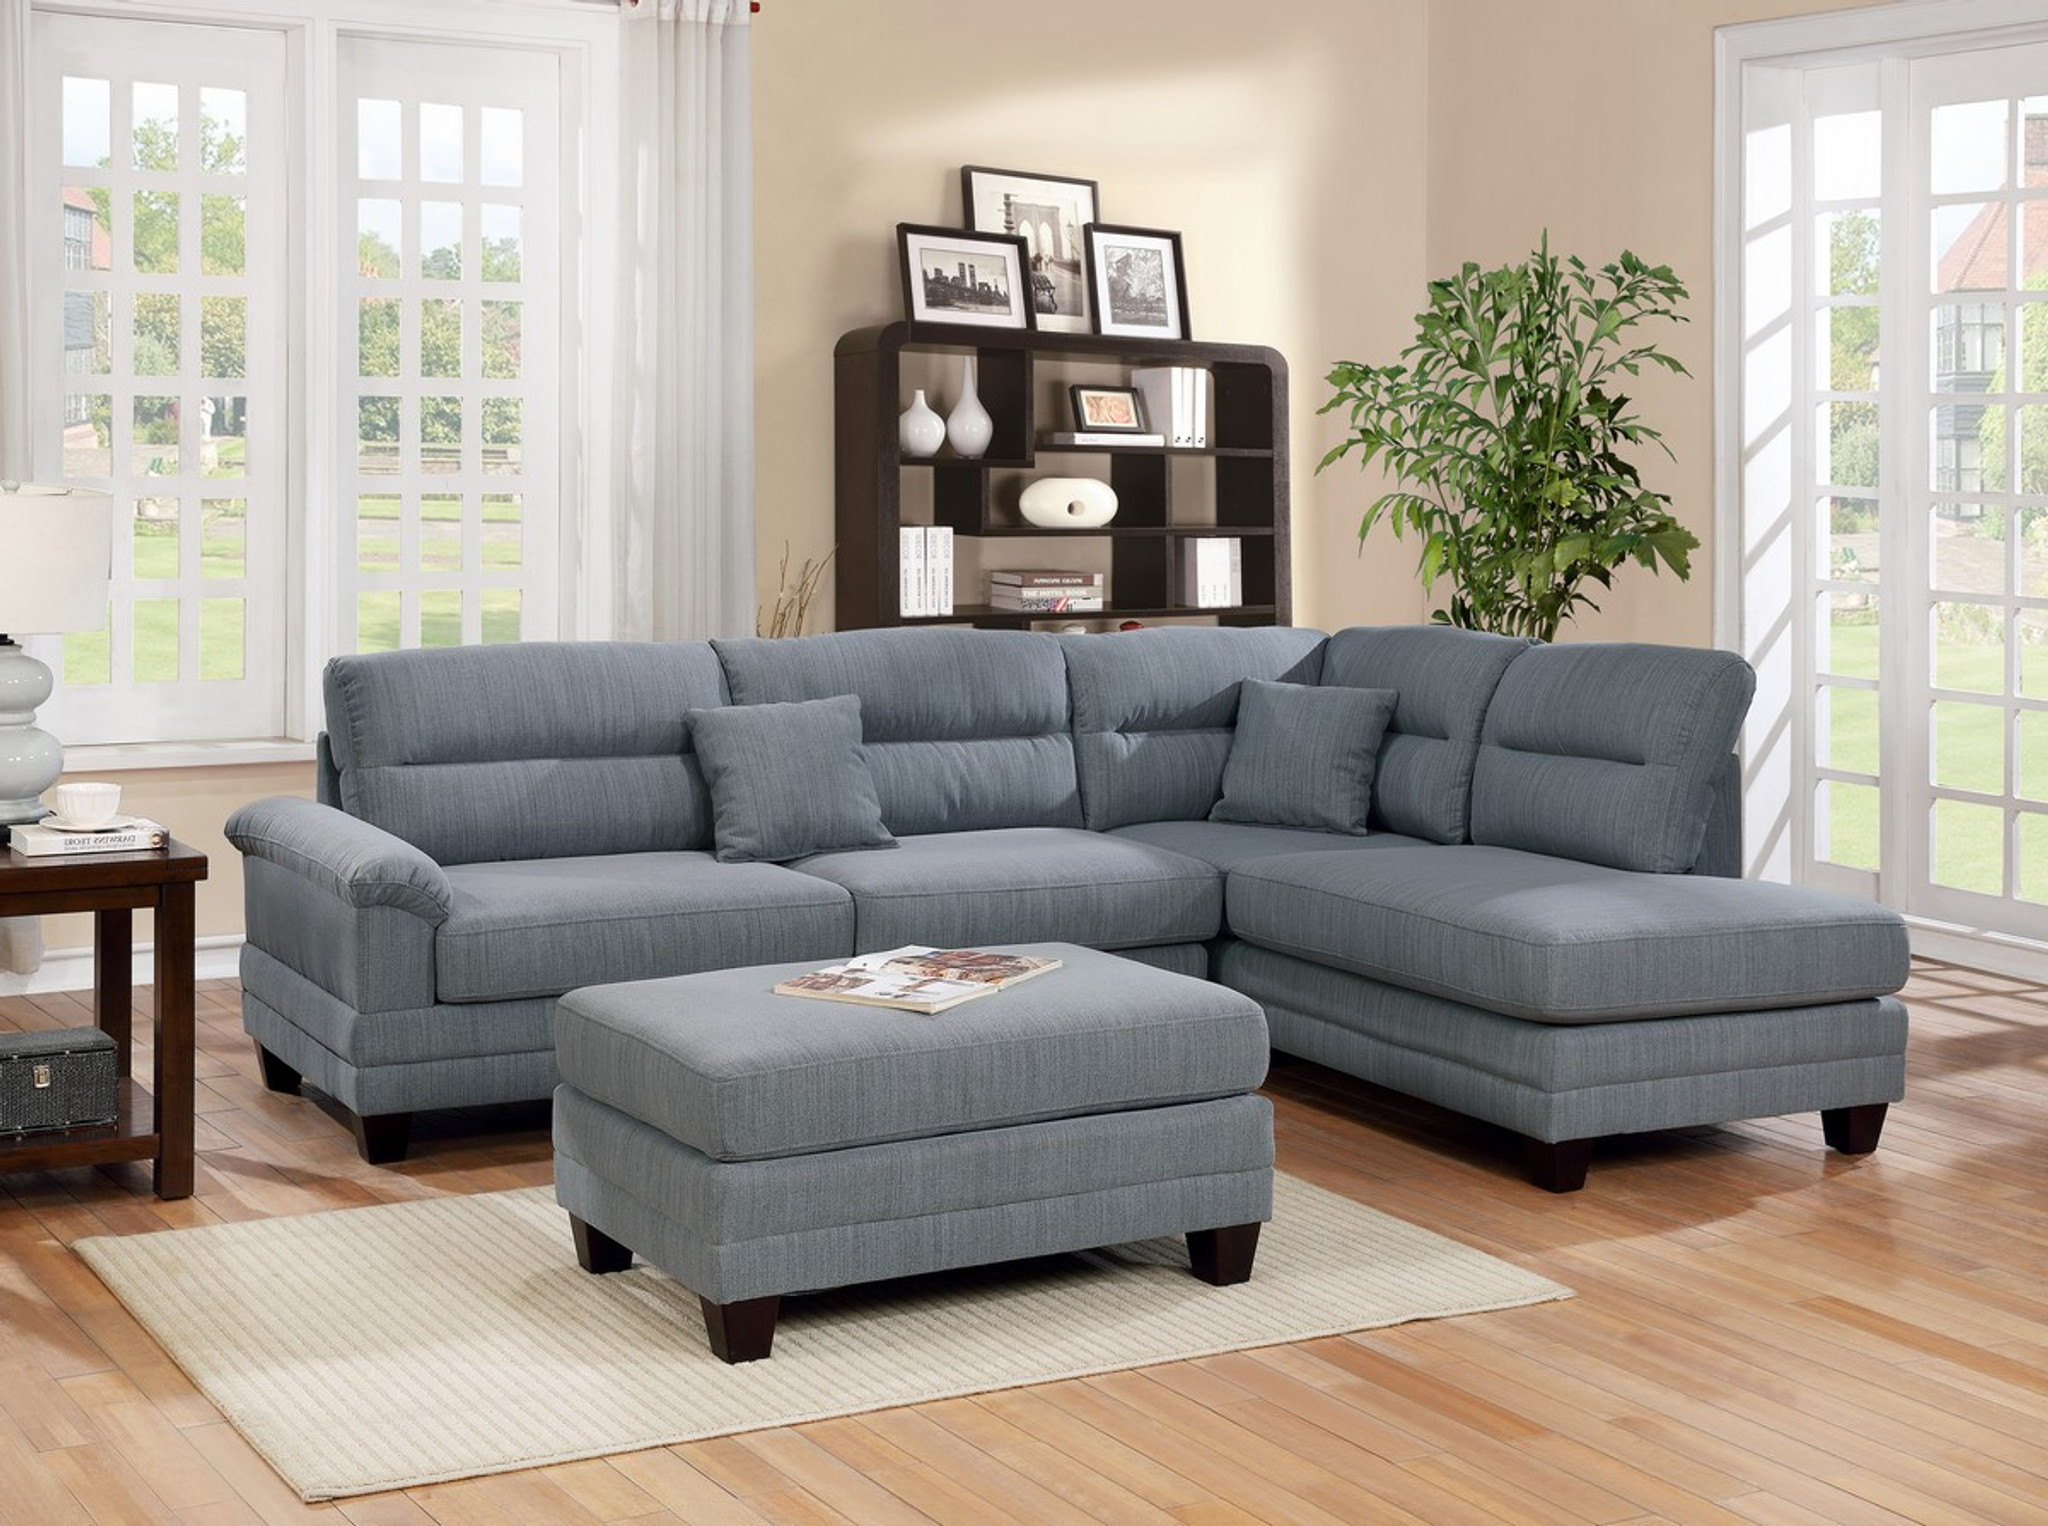 F6585-3PC BENITO SECTIONAL SET WITH OTTOMAN IN GREY By Poundex